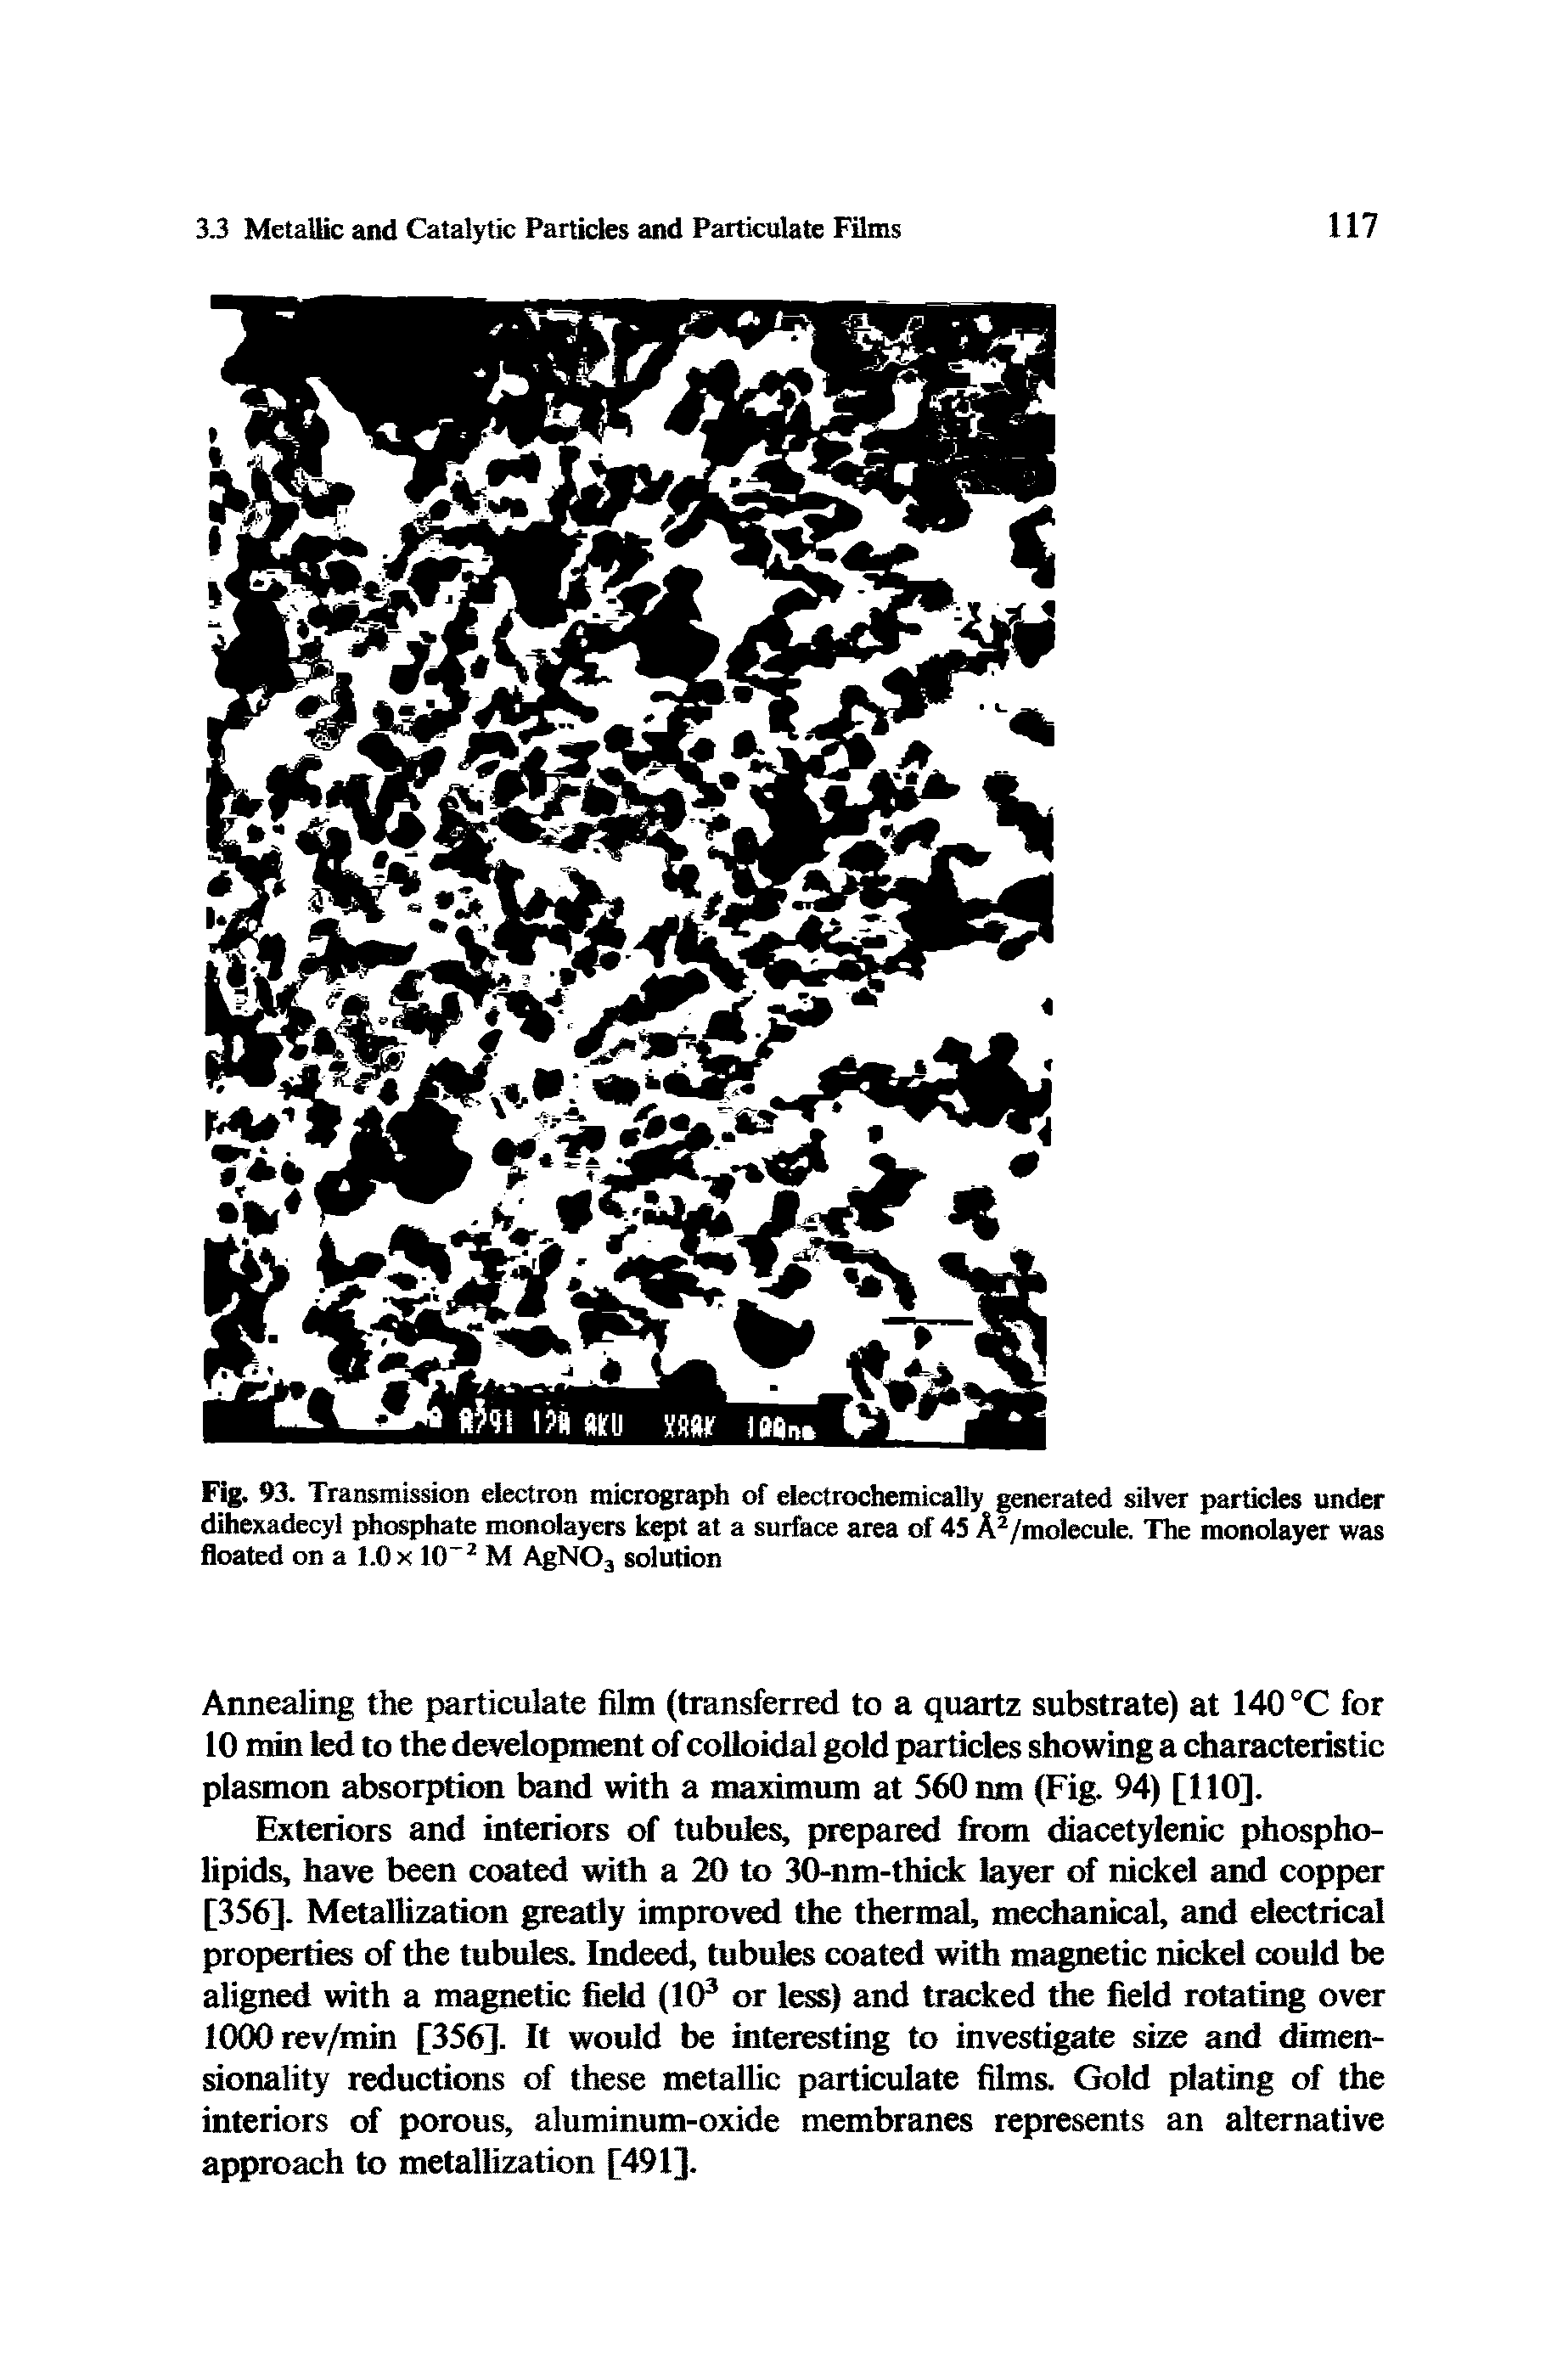 Fig. 93. Transmission electron micrograph of electrochemically generated silver particles under dihexadecyl phosphate monolayers kept at a surface area of 45 A2/molecule. The monolayer was floated on a 1.0 x 10-2 M AgN03 solution...